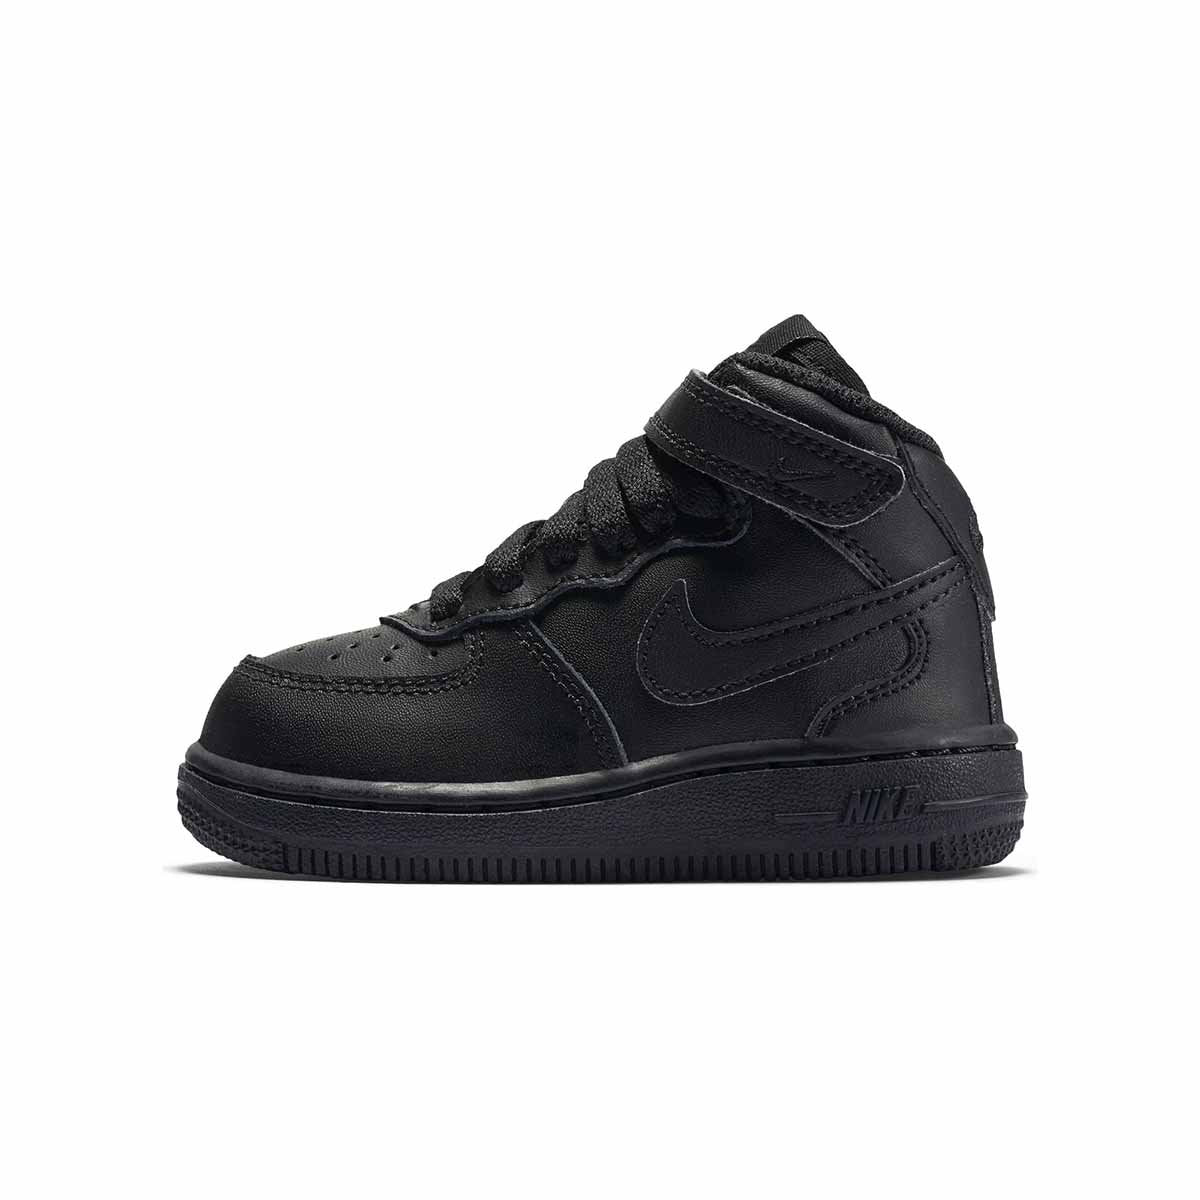 Toddler Nike Force 1 Mid